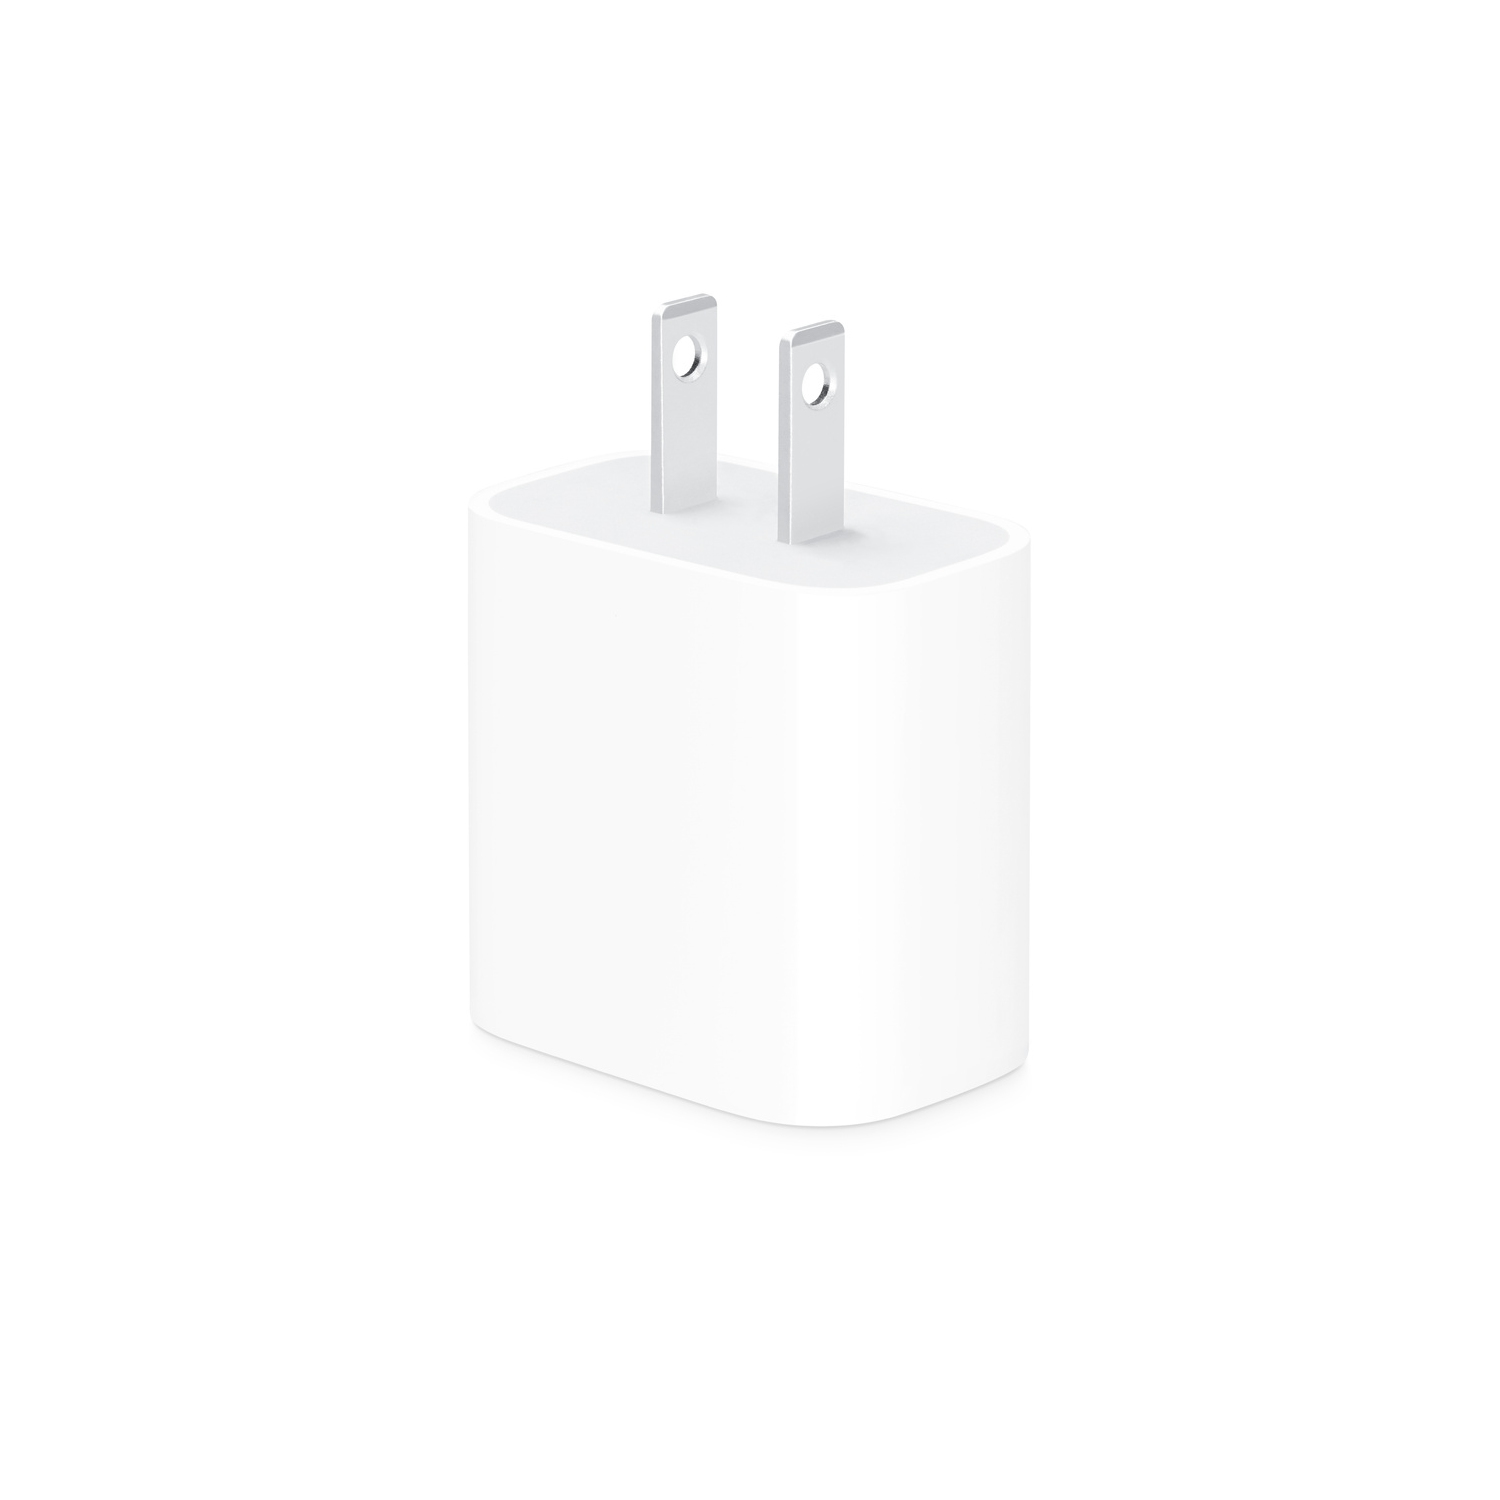 Apple Fast Charging 20W Power Adapter with 2m USB-C to USB-C Cable for iPad Air (4th Generation), iPad Pro 11-inch, iPad Pro 12.9-inch (3rd Generation & Later)